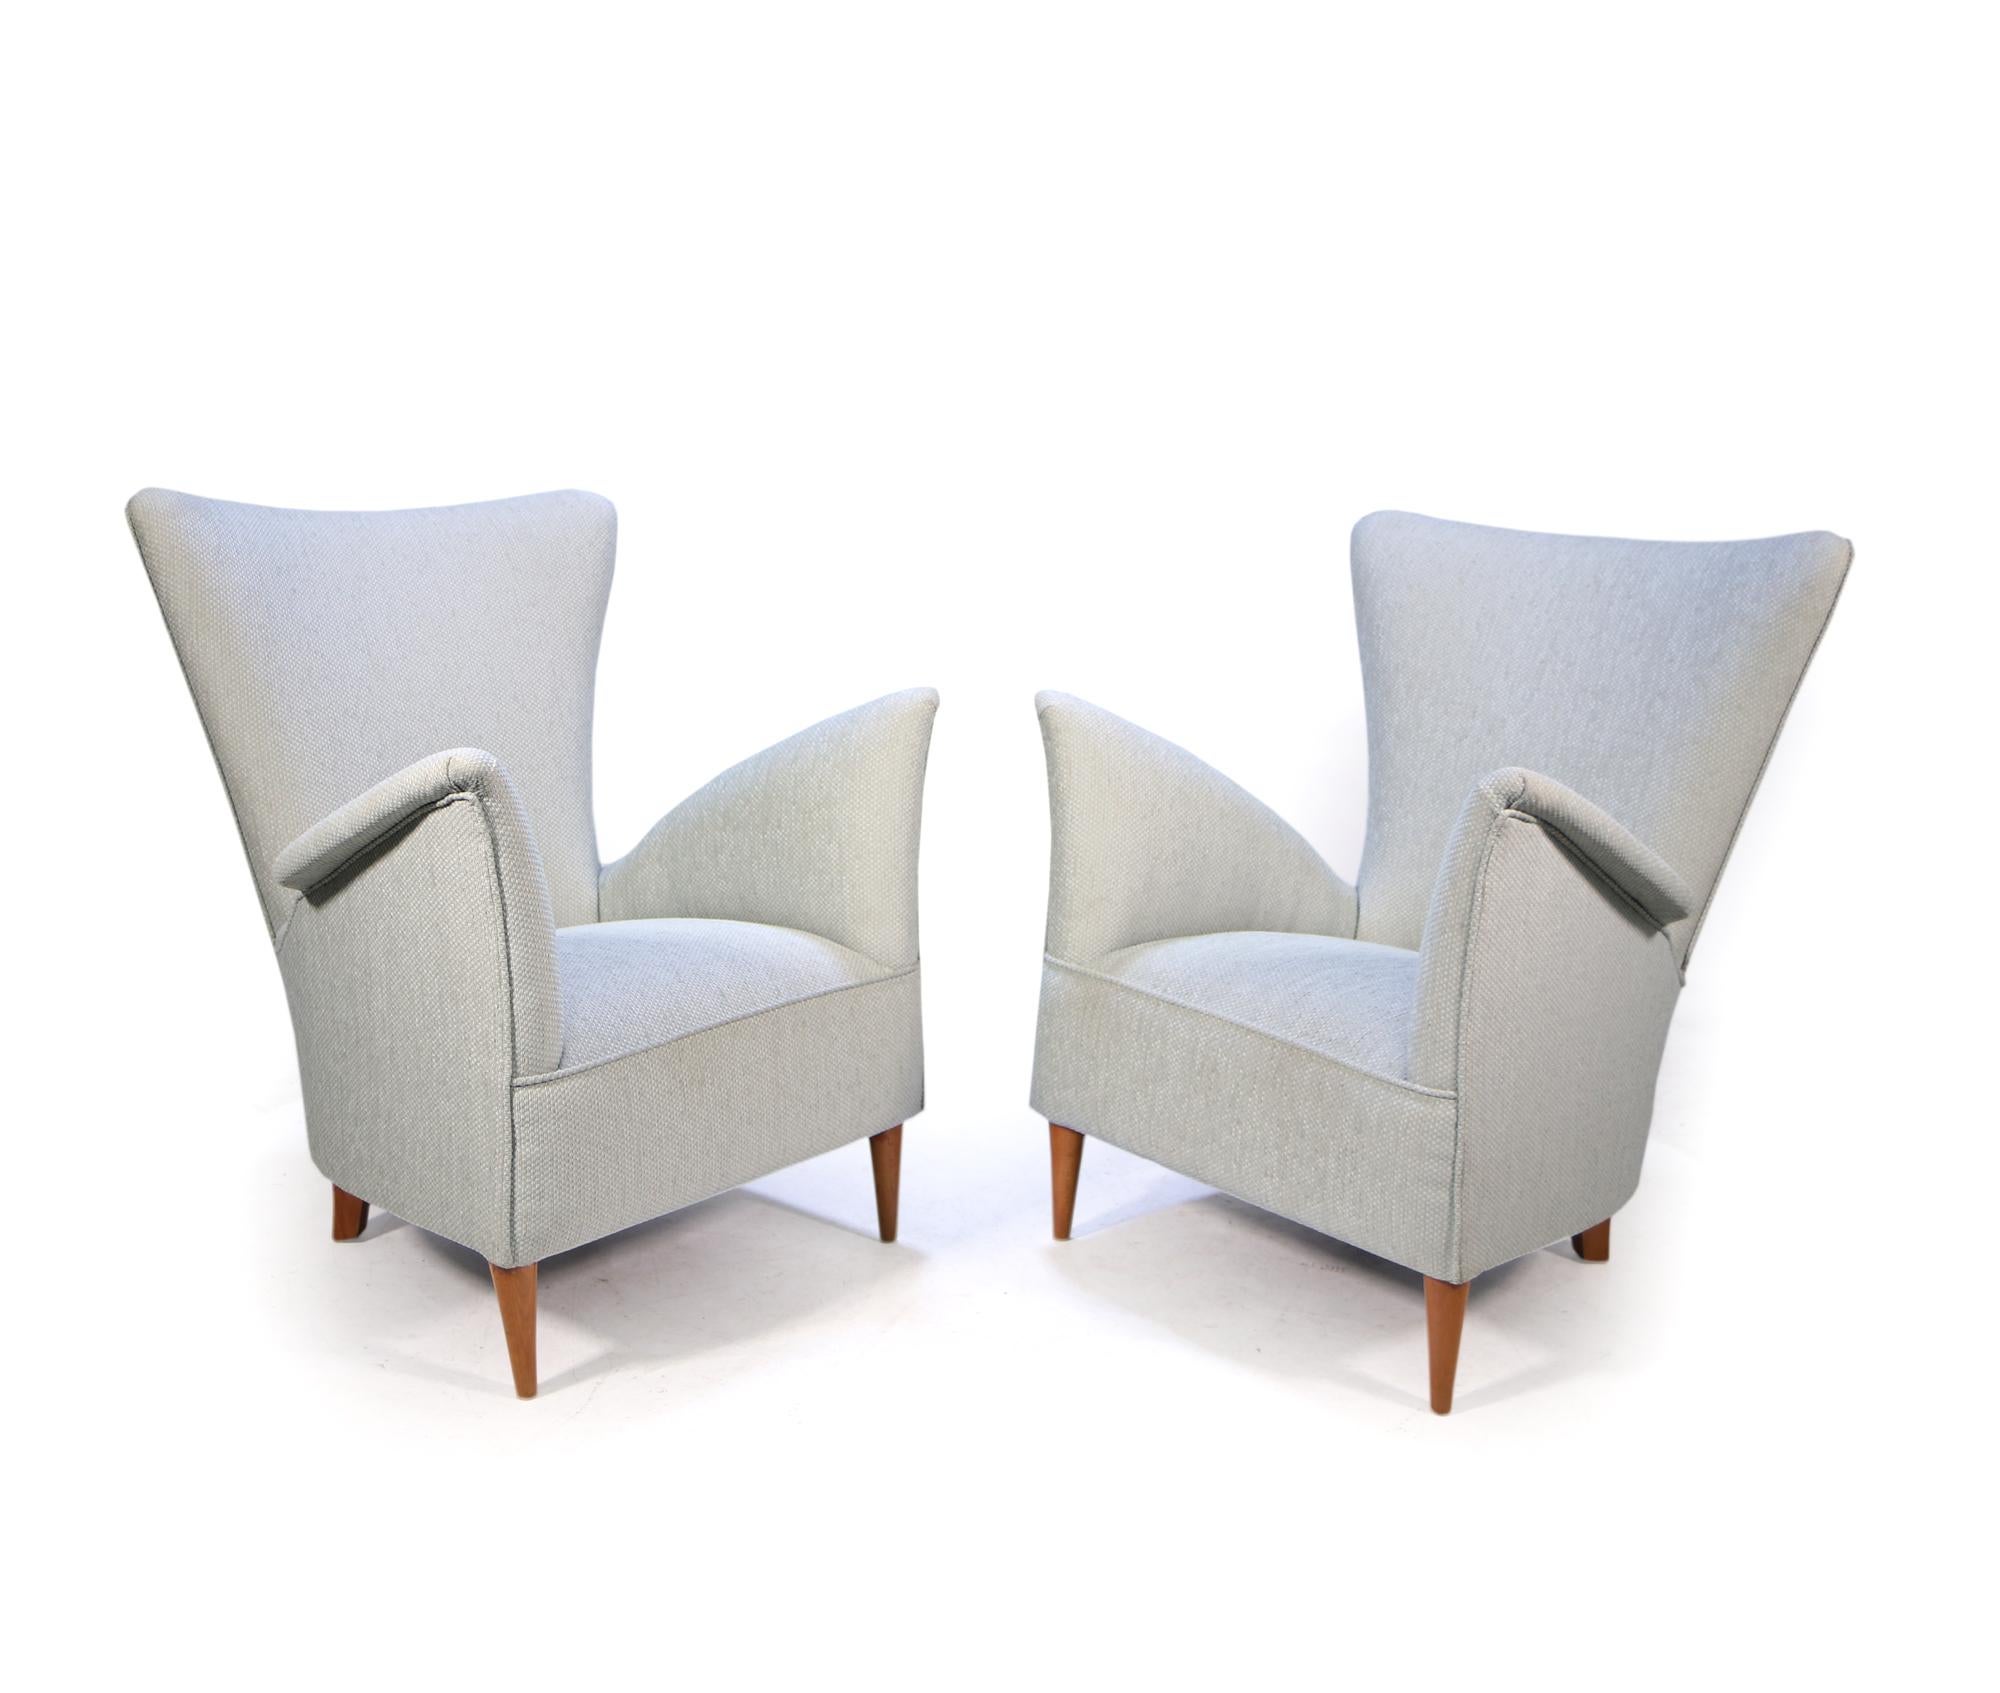 A Pair of armchairs designed by Gio Ponti for the Hotel Bristol in 1954, this set has been fully upholstered, coil sprung seat over hardwood frame covered in heavyweight mint and silver colour geometric fabric and stands on a simple set of light